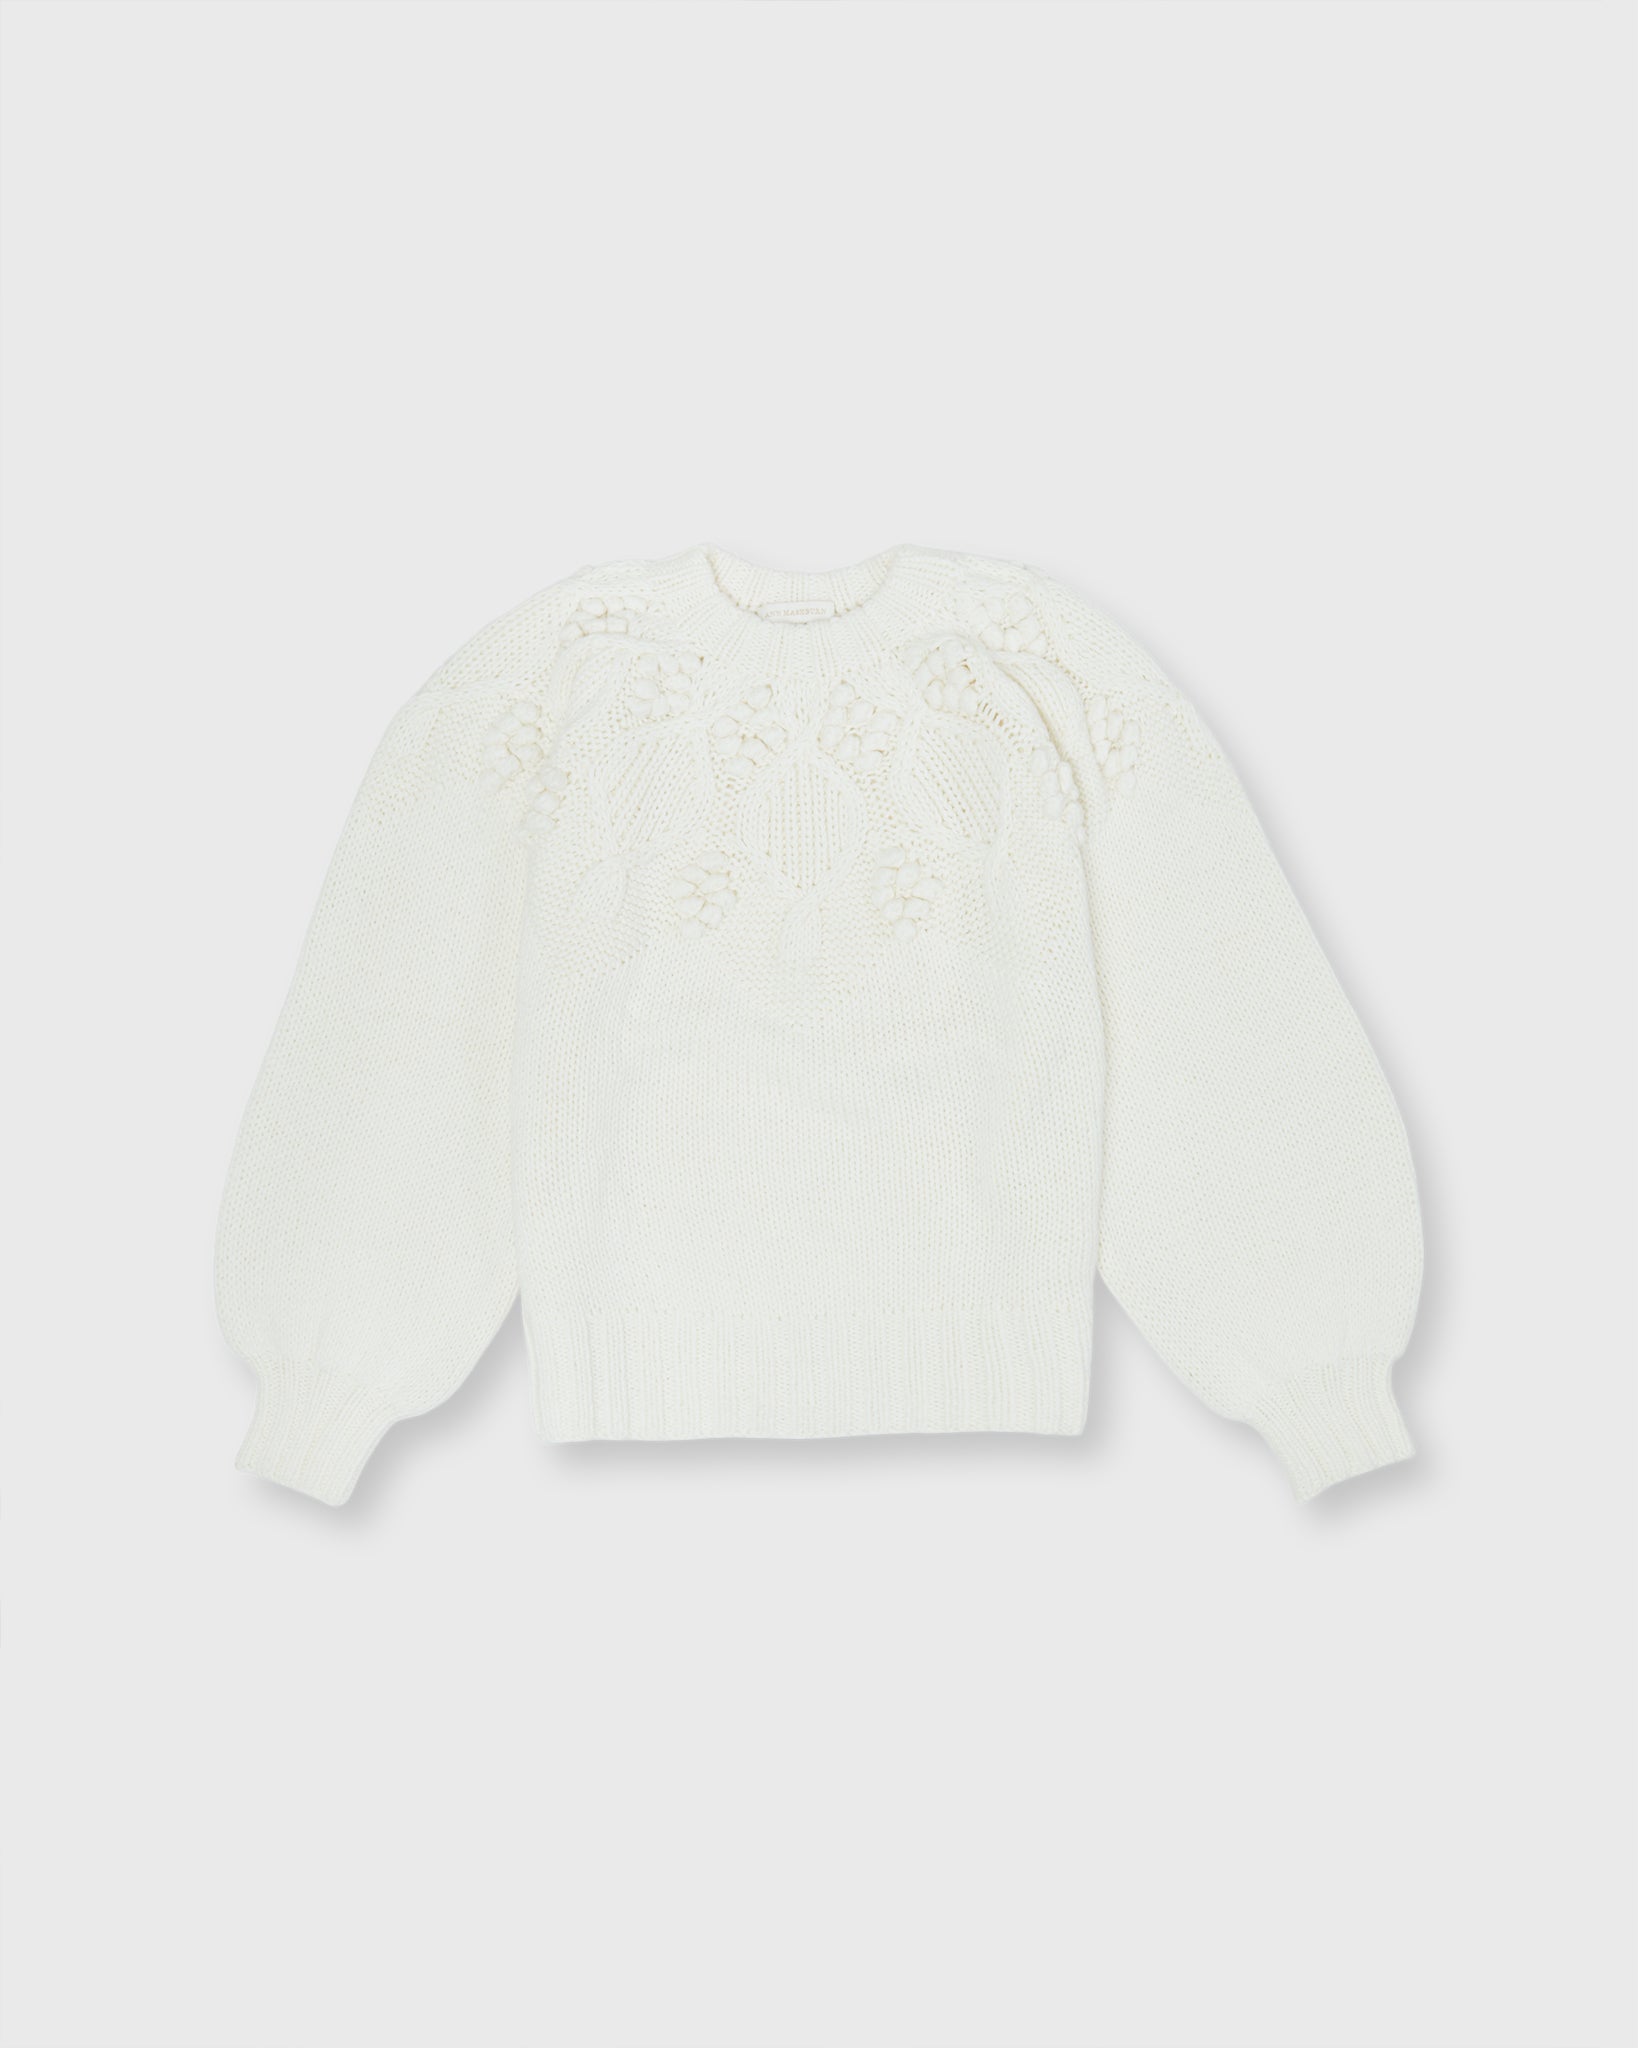 Lacey Sweater in Ivory Organic Cotton/Baby Alpaca